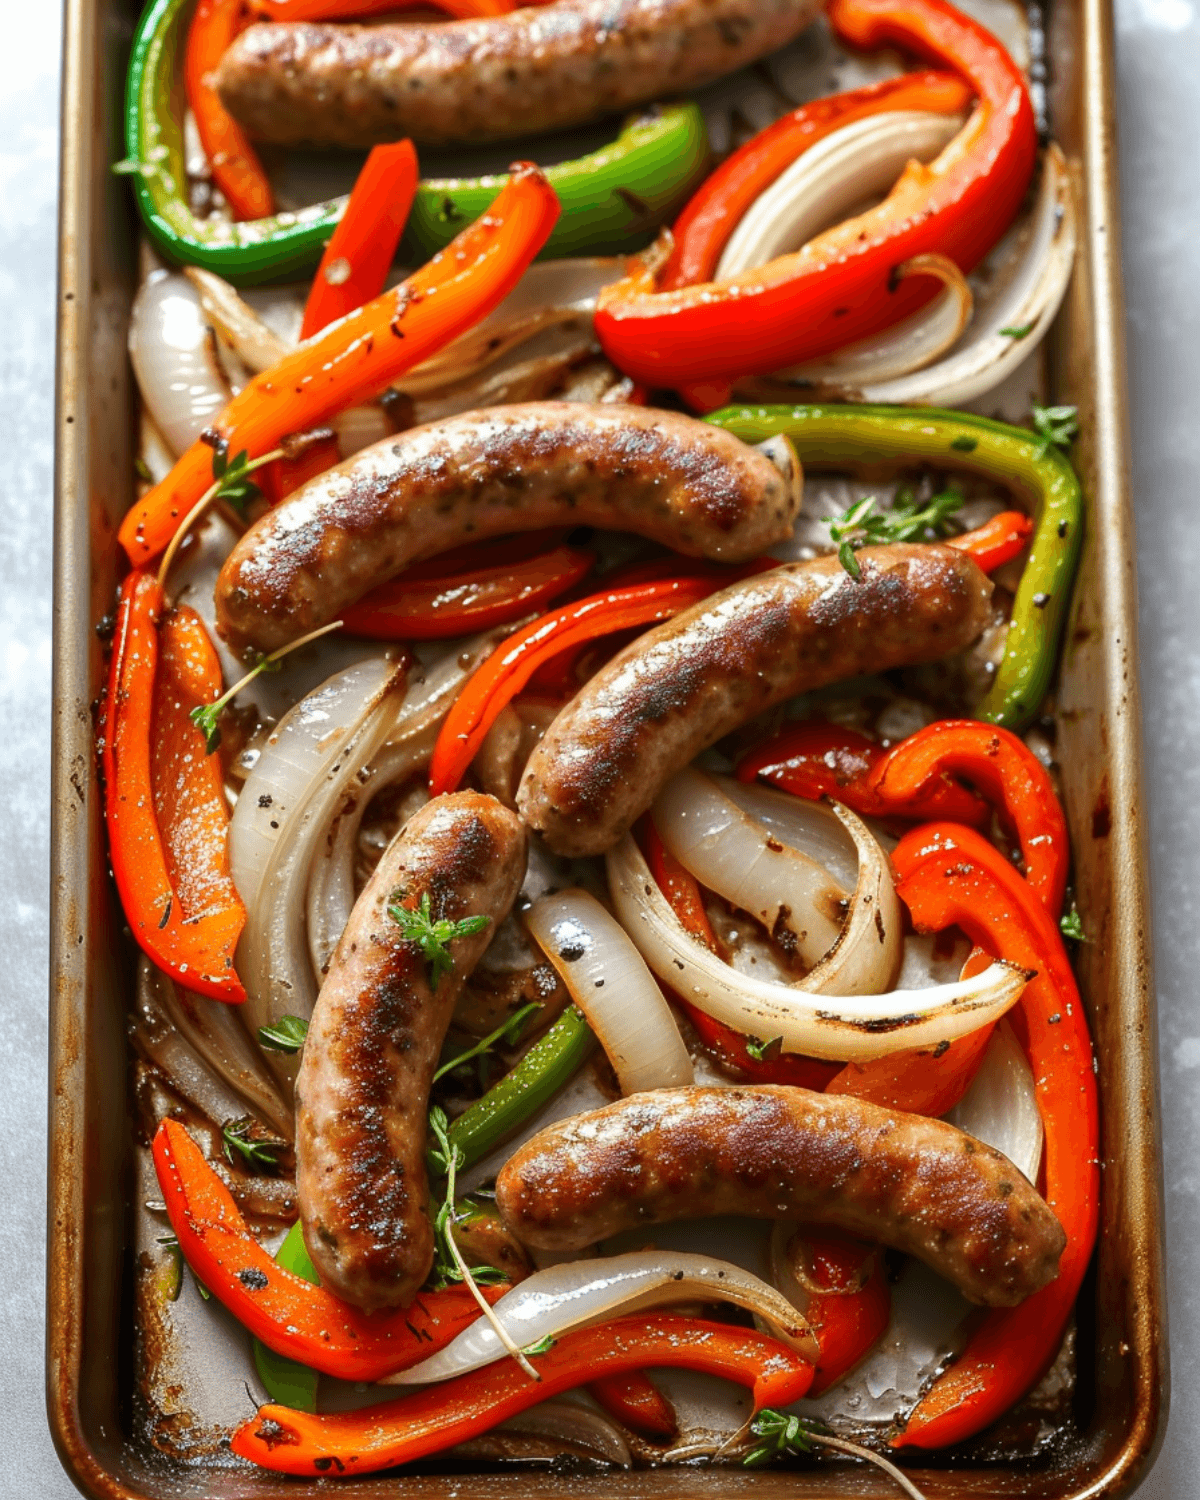 Sausage and peppers baked on a sheet.